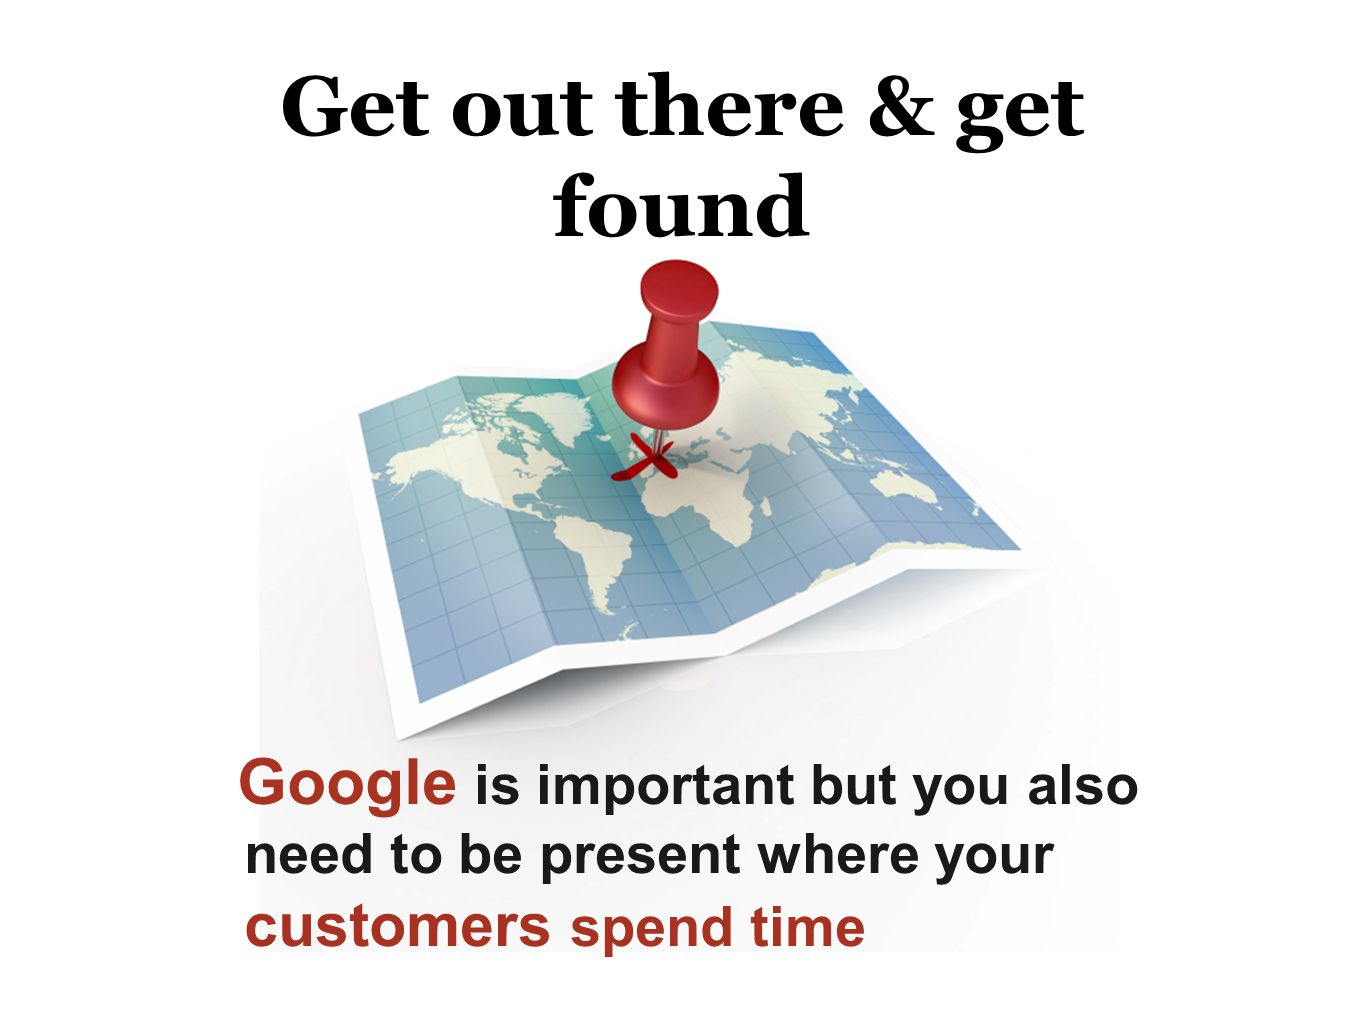 Get out there & get found Google is important but you also need to be present where your customers spend time